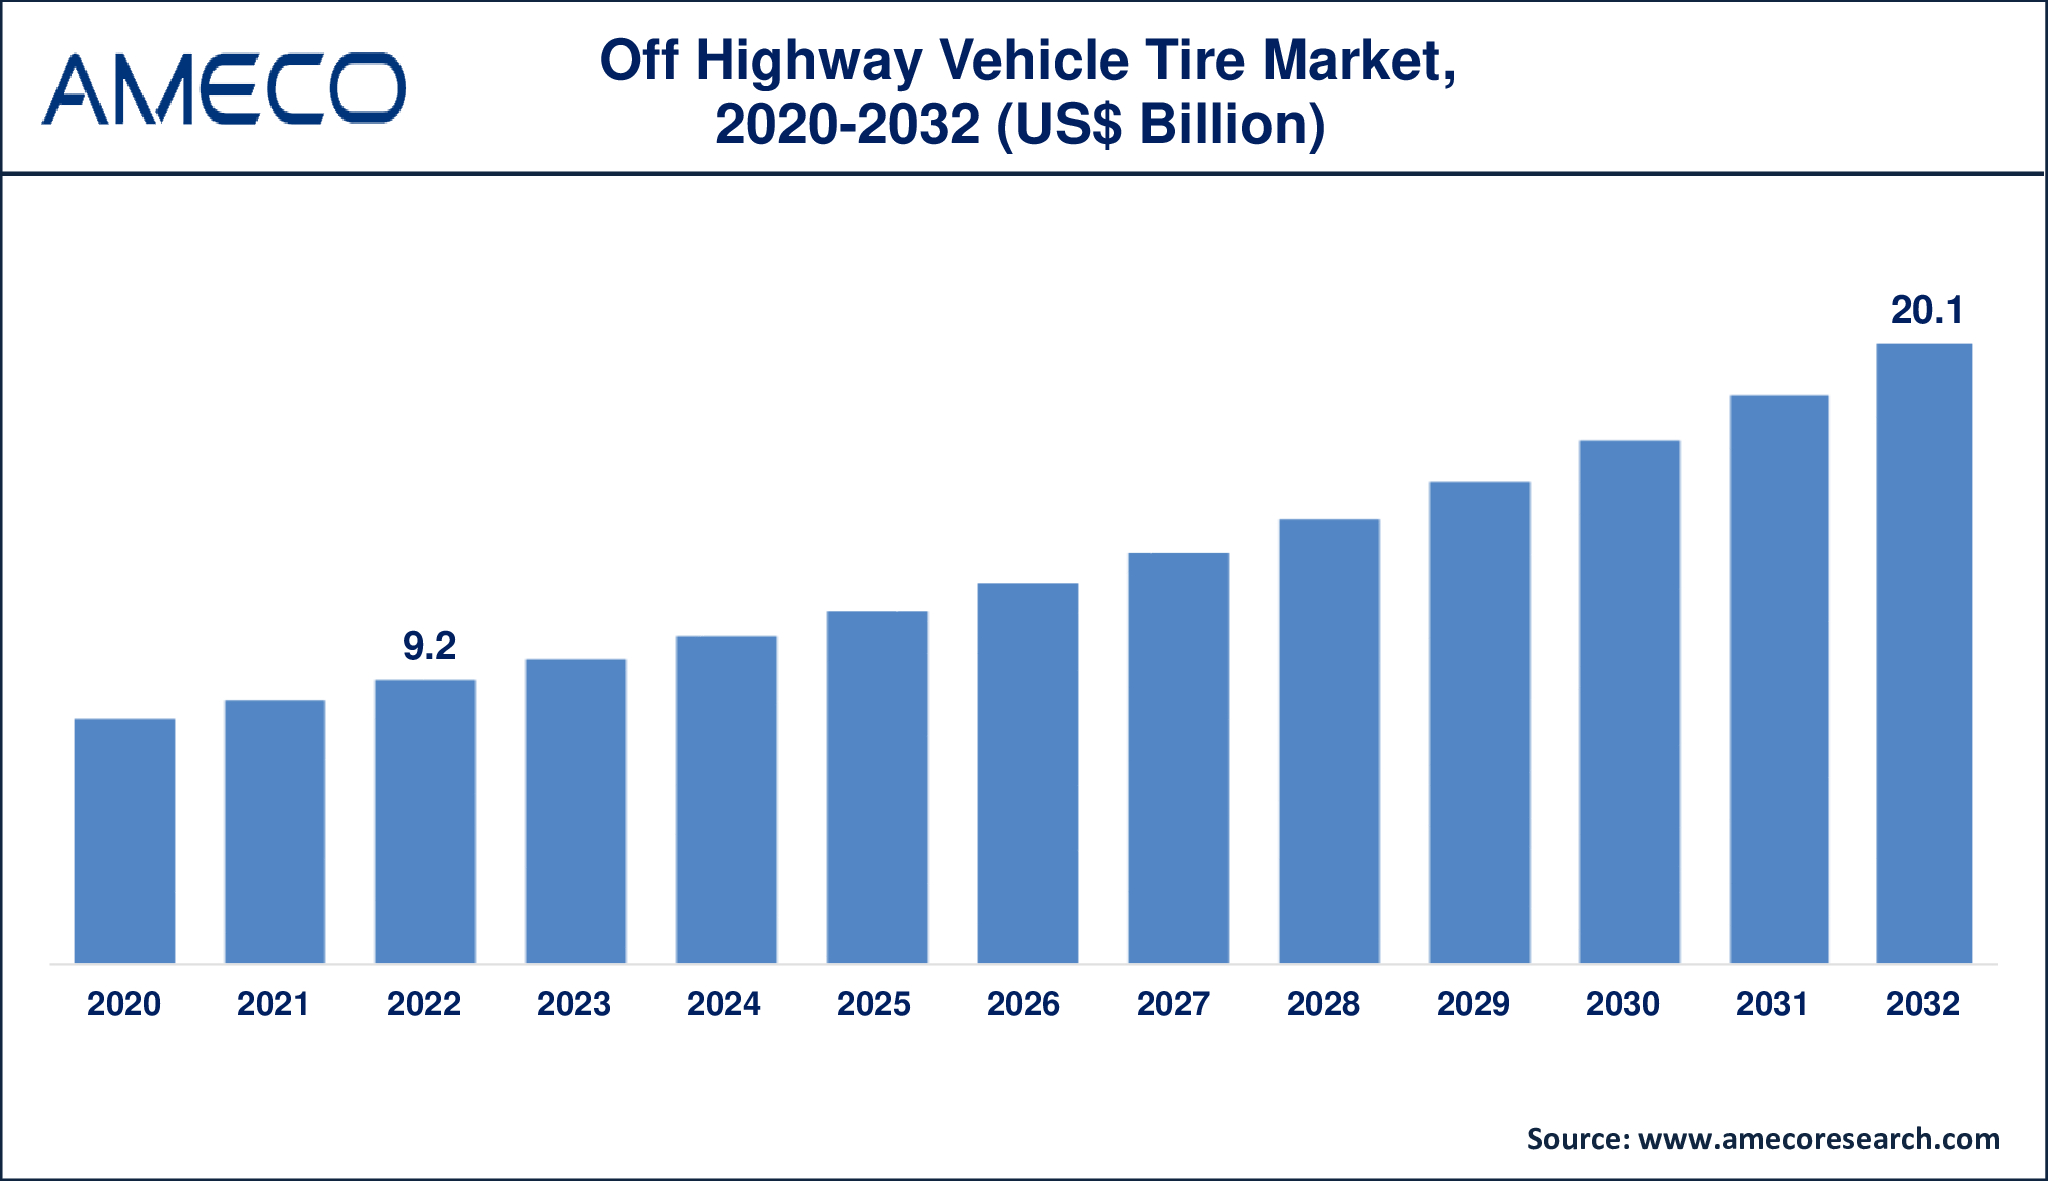 Off Highway Vehicle Tire Market Dynamics